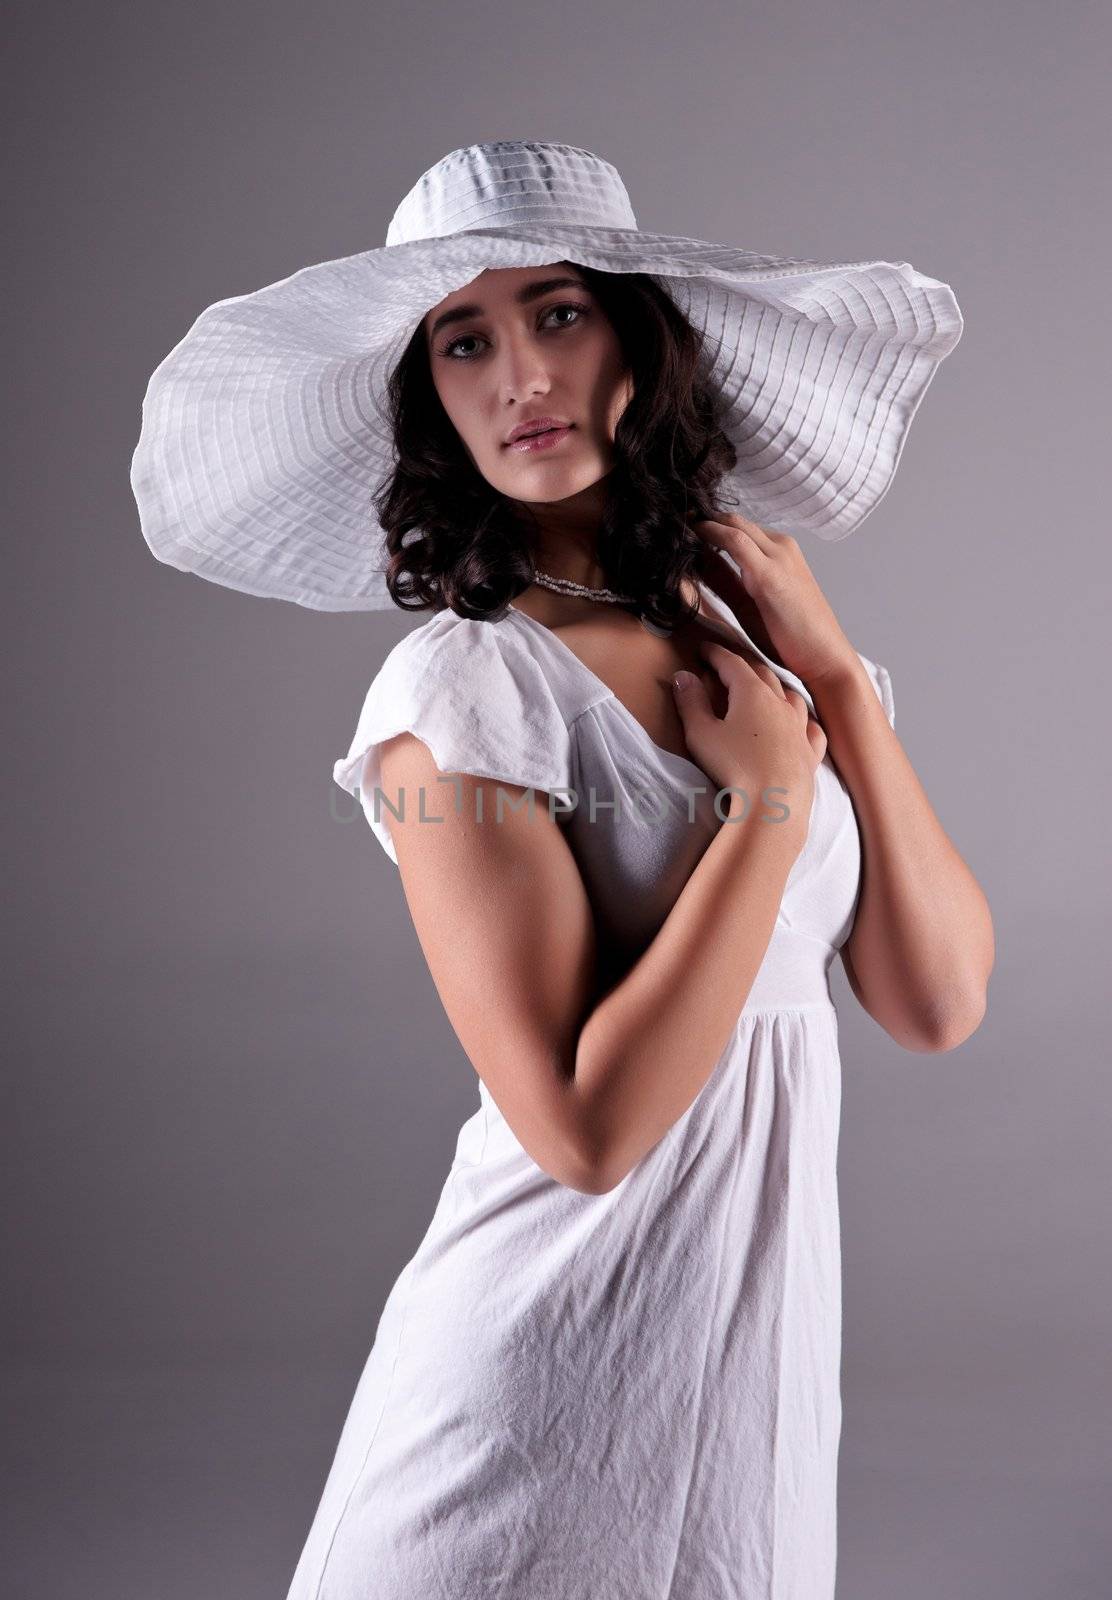 beautiful fashion model by clearviewstock